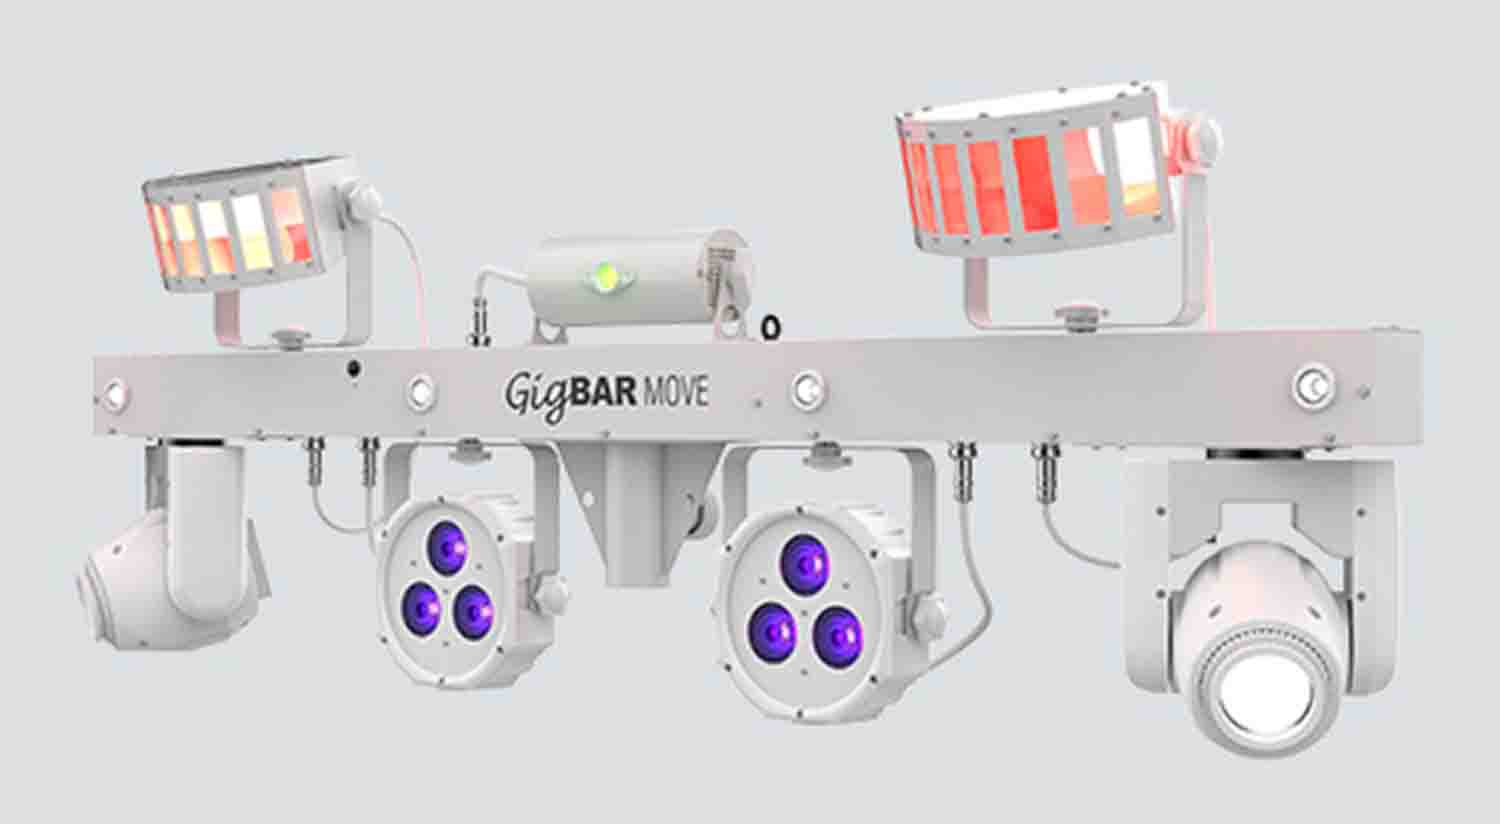 B Stock: Chauvet DJ GIGBAR MOVE 5-in-1 Lighting System with Pre-Mounted On a Single Bar- White by Chauvet DJ